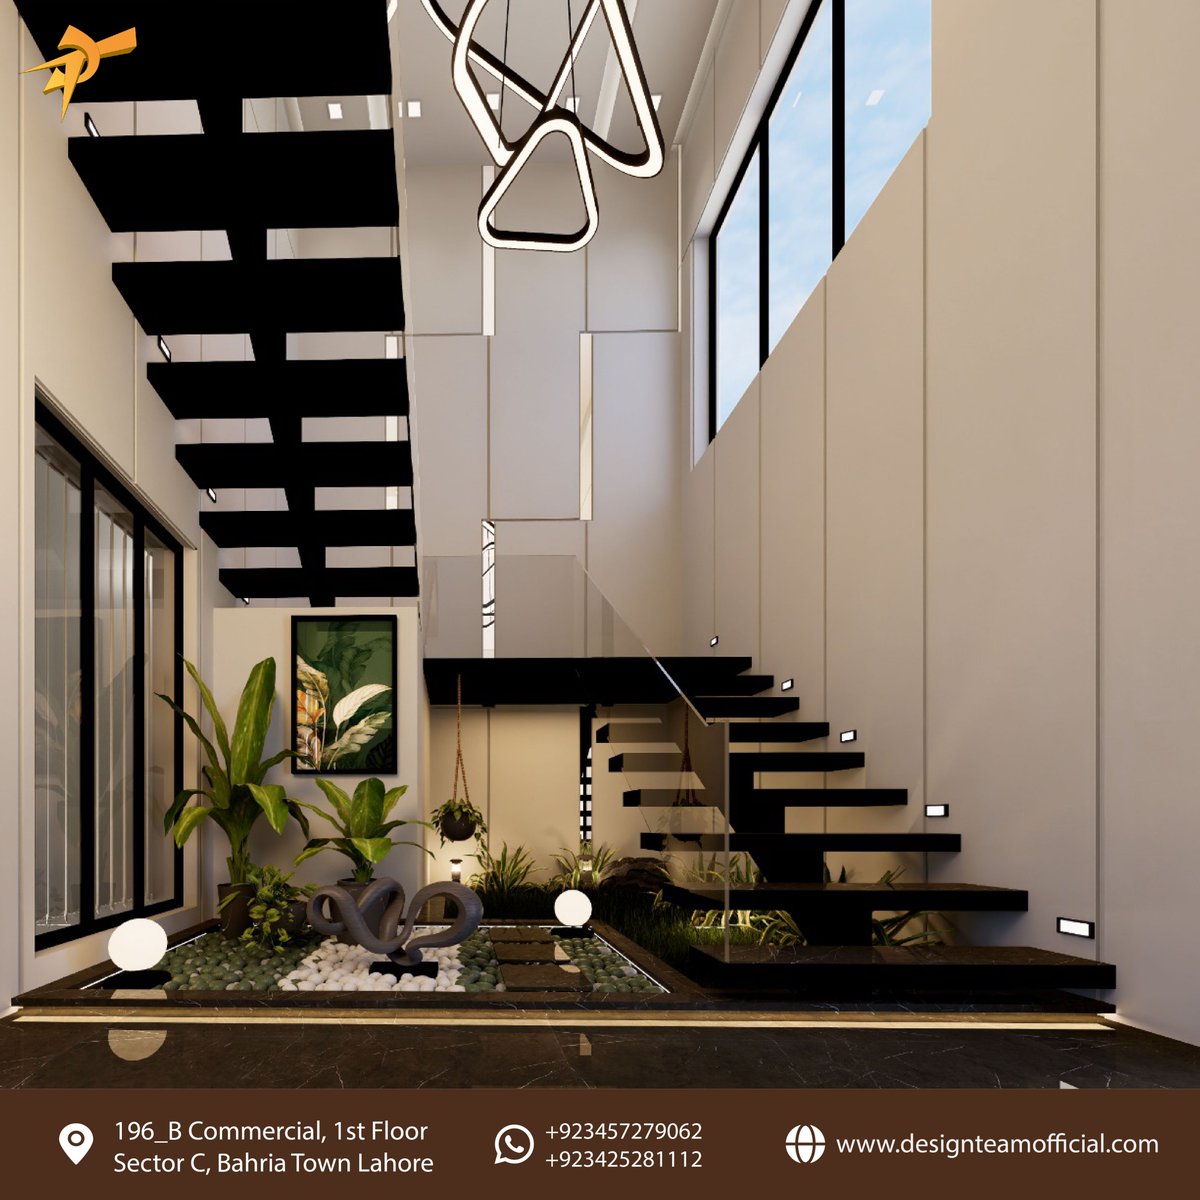 This creative design idea will motivate you to execute the seamlessly stunning wardrobe remodel of your dreams.
#fbpost #designteam #design #homedesign #homedecor #home #architecture #architect #residentialdesign #staircase #archilovers #woodenstairs #floatingstairs #uniquedesign